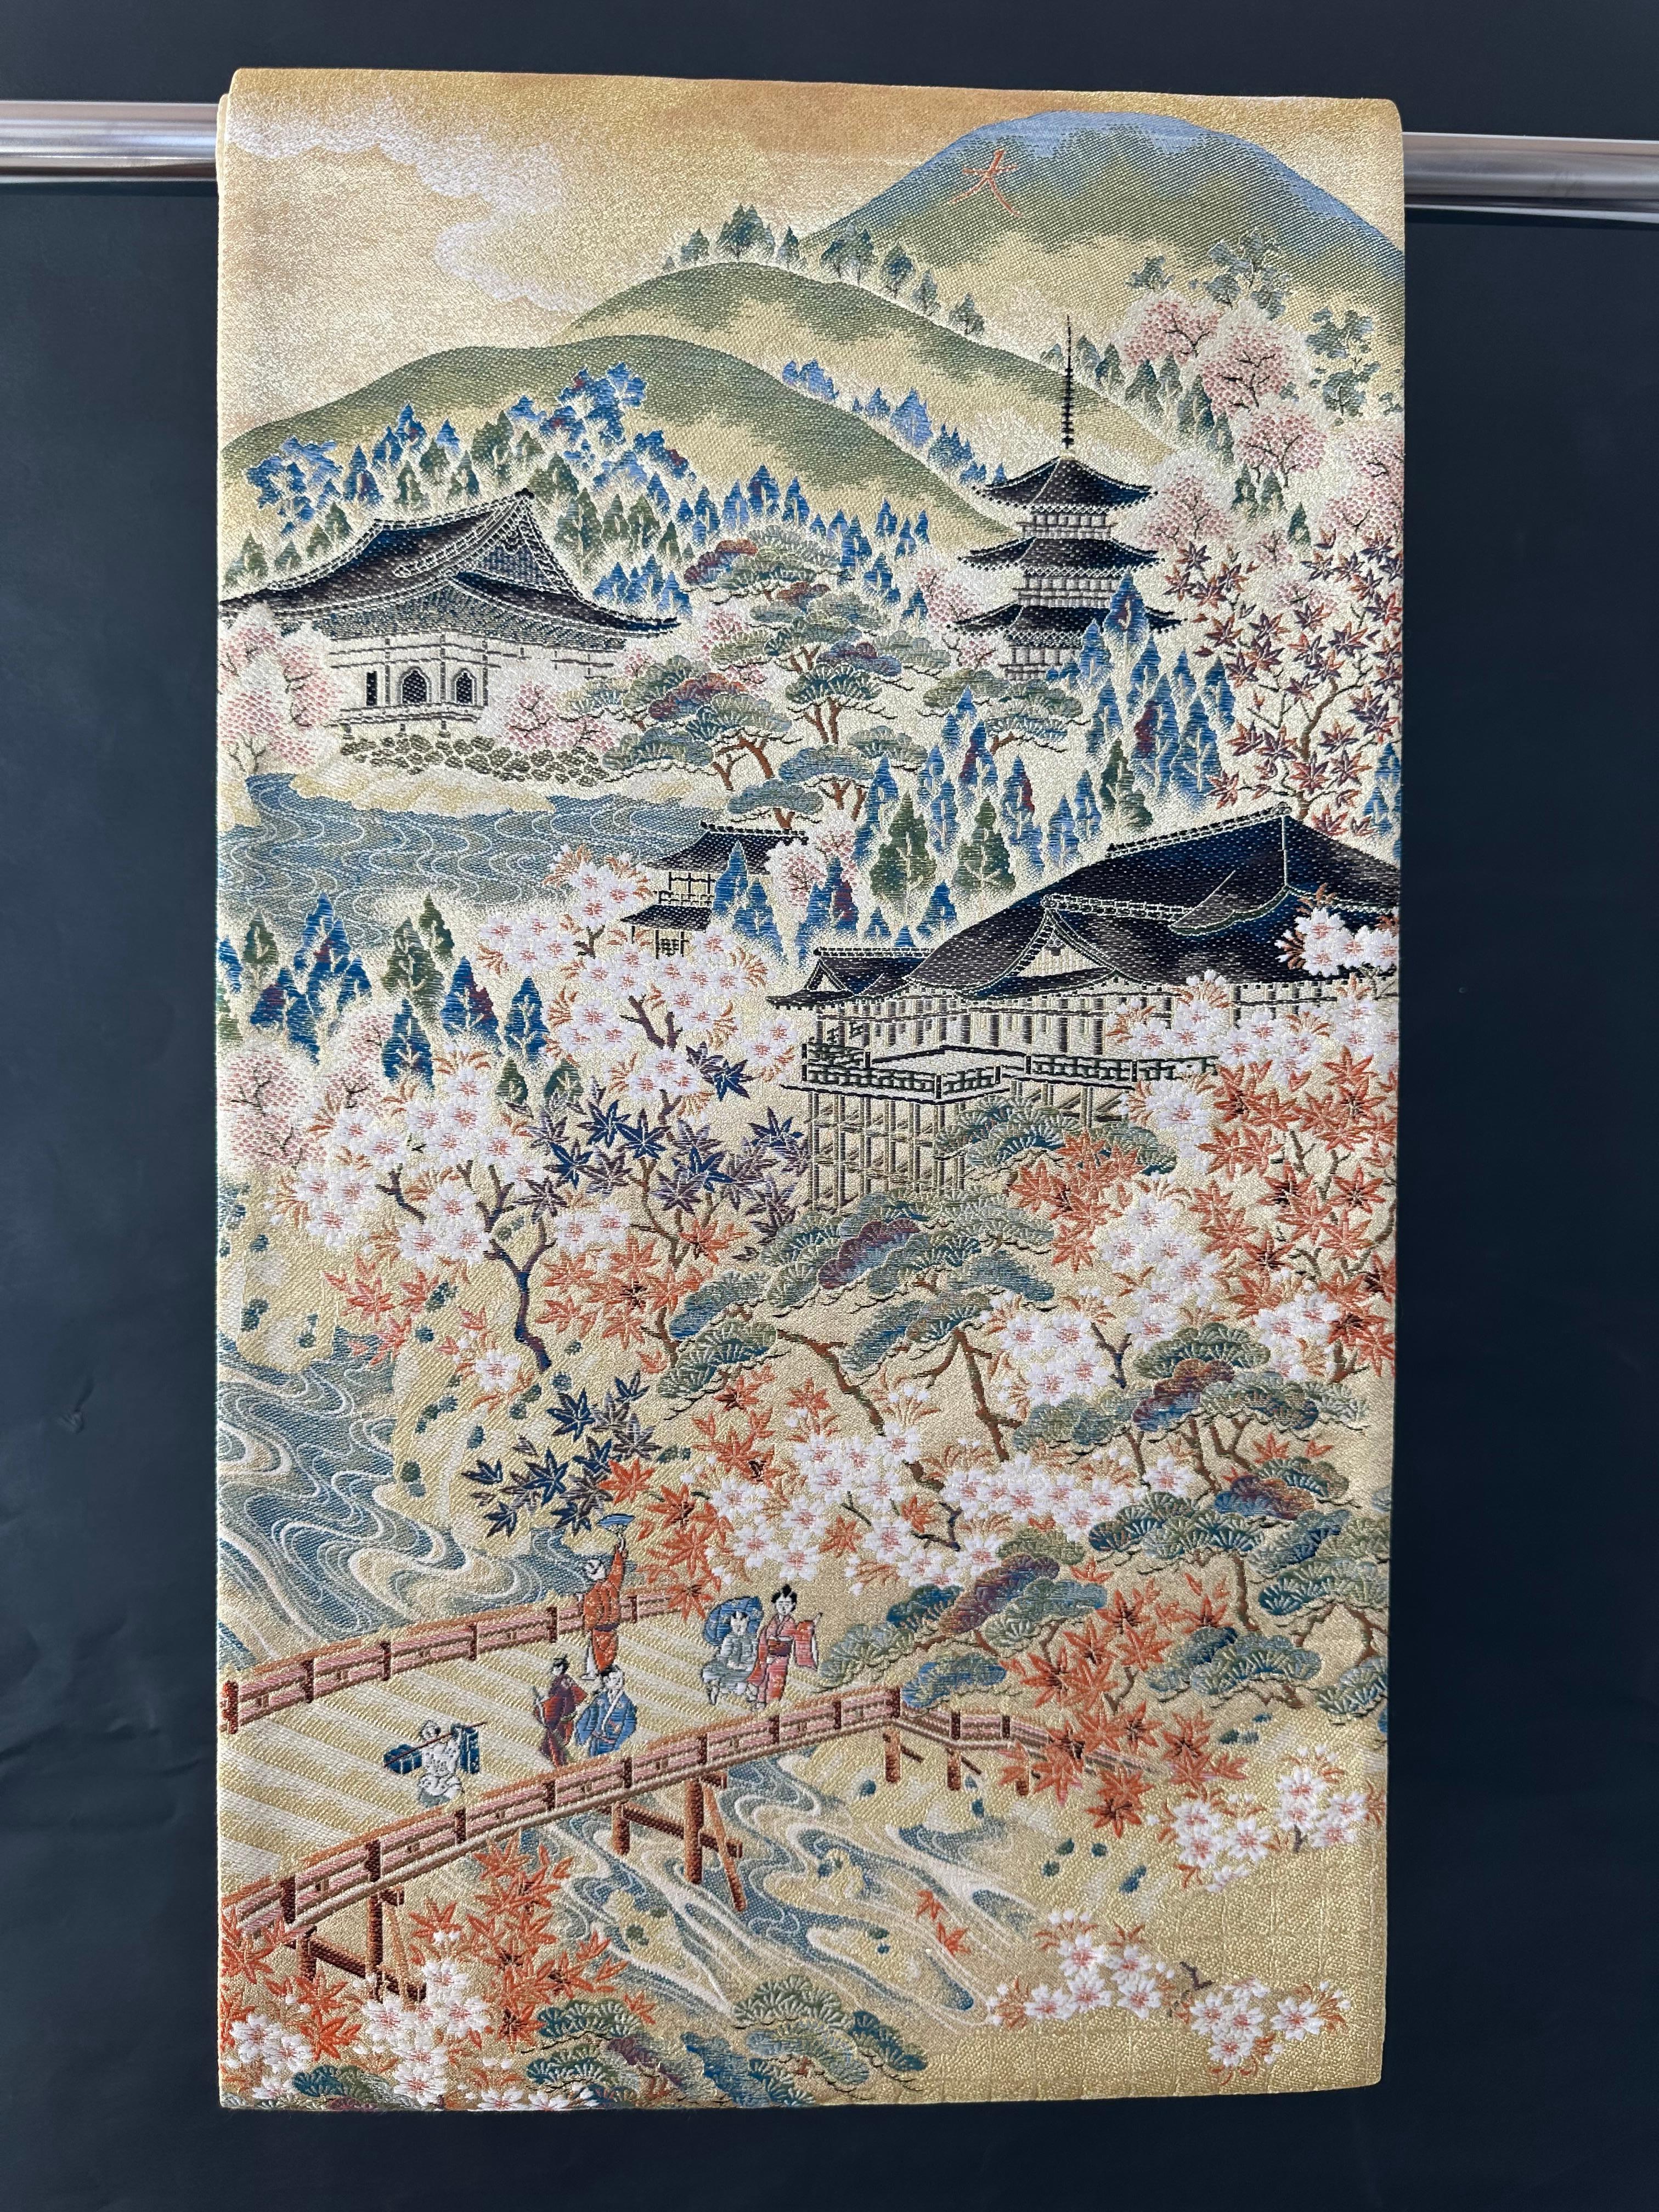 Japanese Vintage Kimono Obi (Kimono Sash) selected by Kimono-Couture

-Dimension:434×31cm
-Condition:Very Good Condition
-Shipping Method: DHL

This kimono obi is decorated with beautiful scenes of Kyoto, the ancient capital of Japan, including